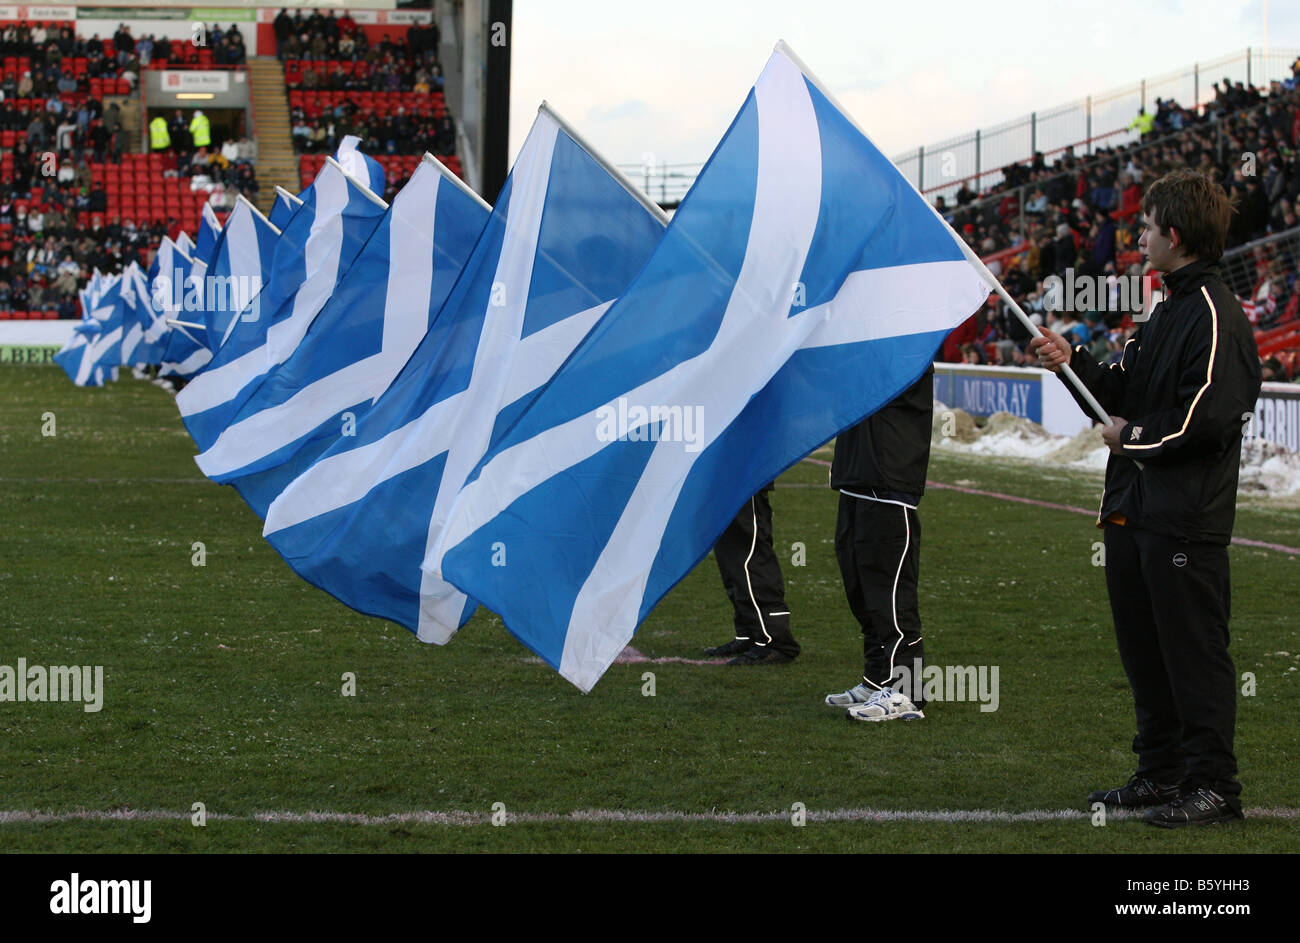 Young flag bearers waving Scottish Saltire flags at a national rugby match at Pittodrie Stadium, Aberdeen, Scotland, uk Stock Photo